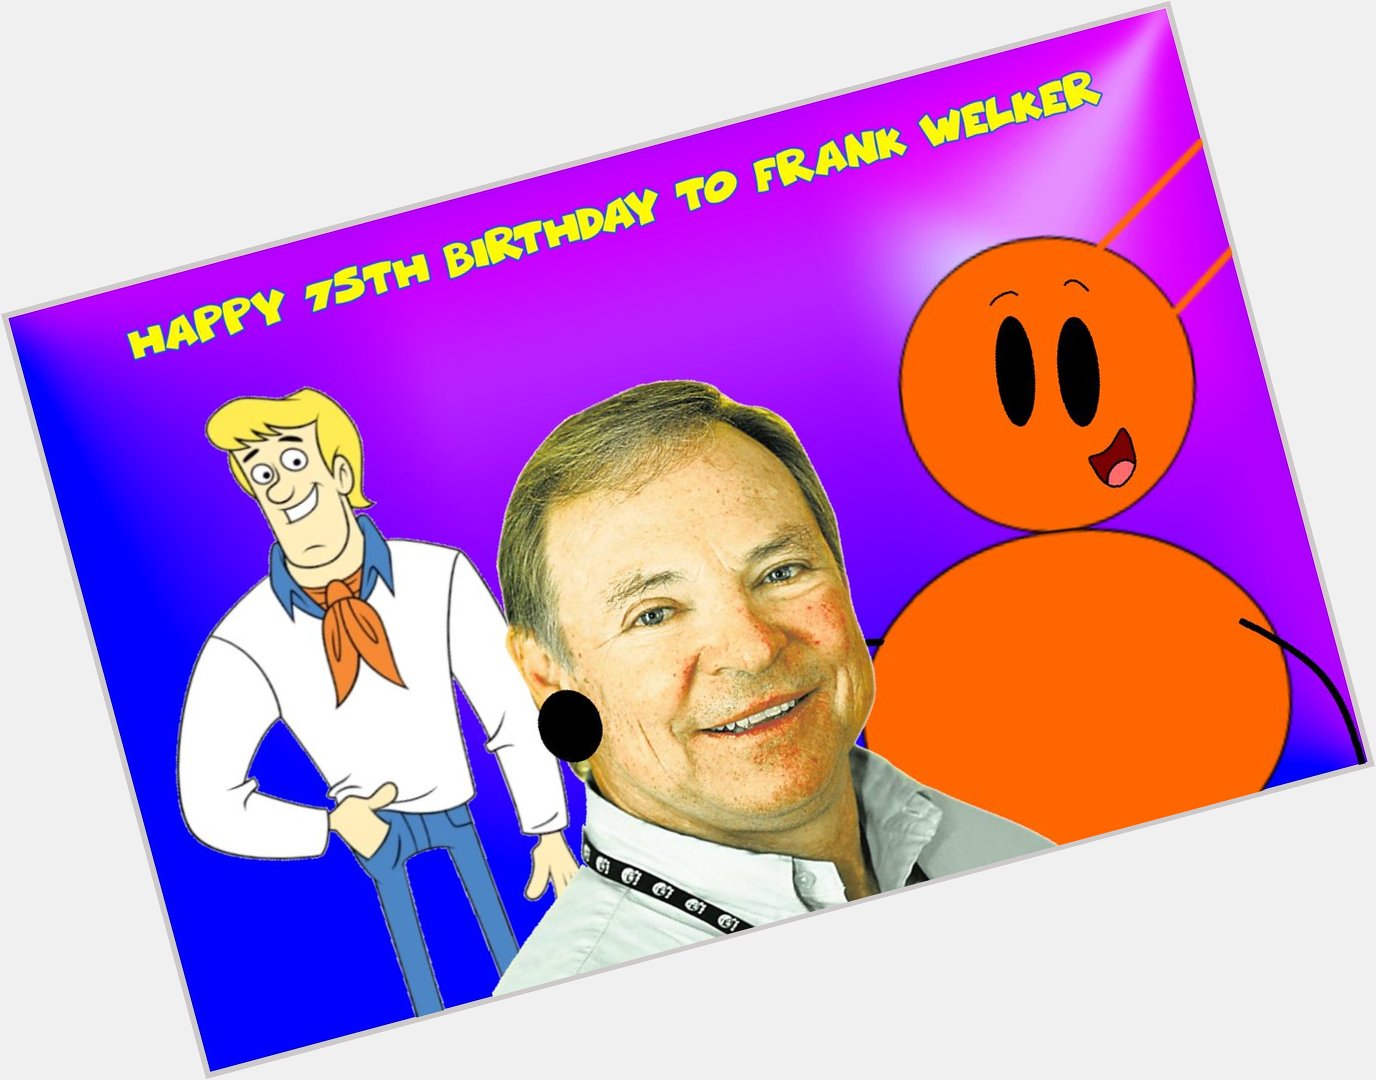 Happy 75th Birthday To Frank Welker 